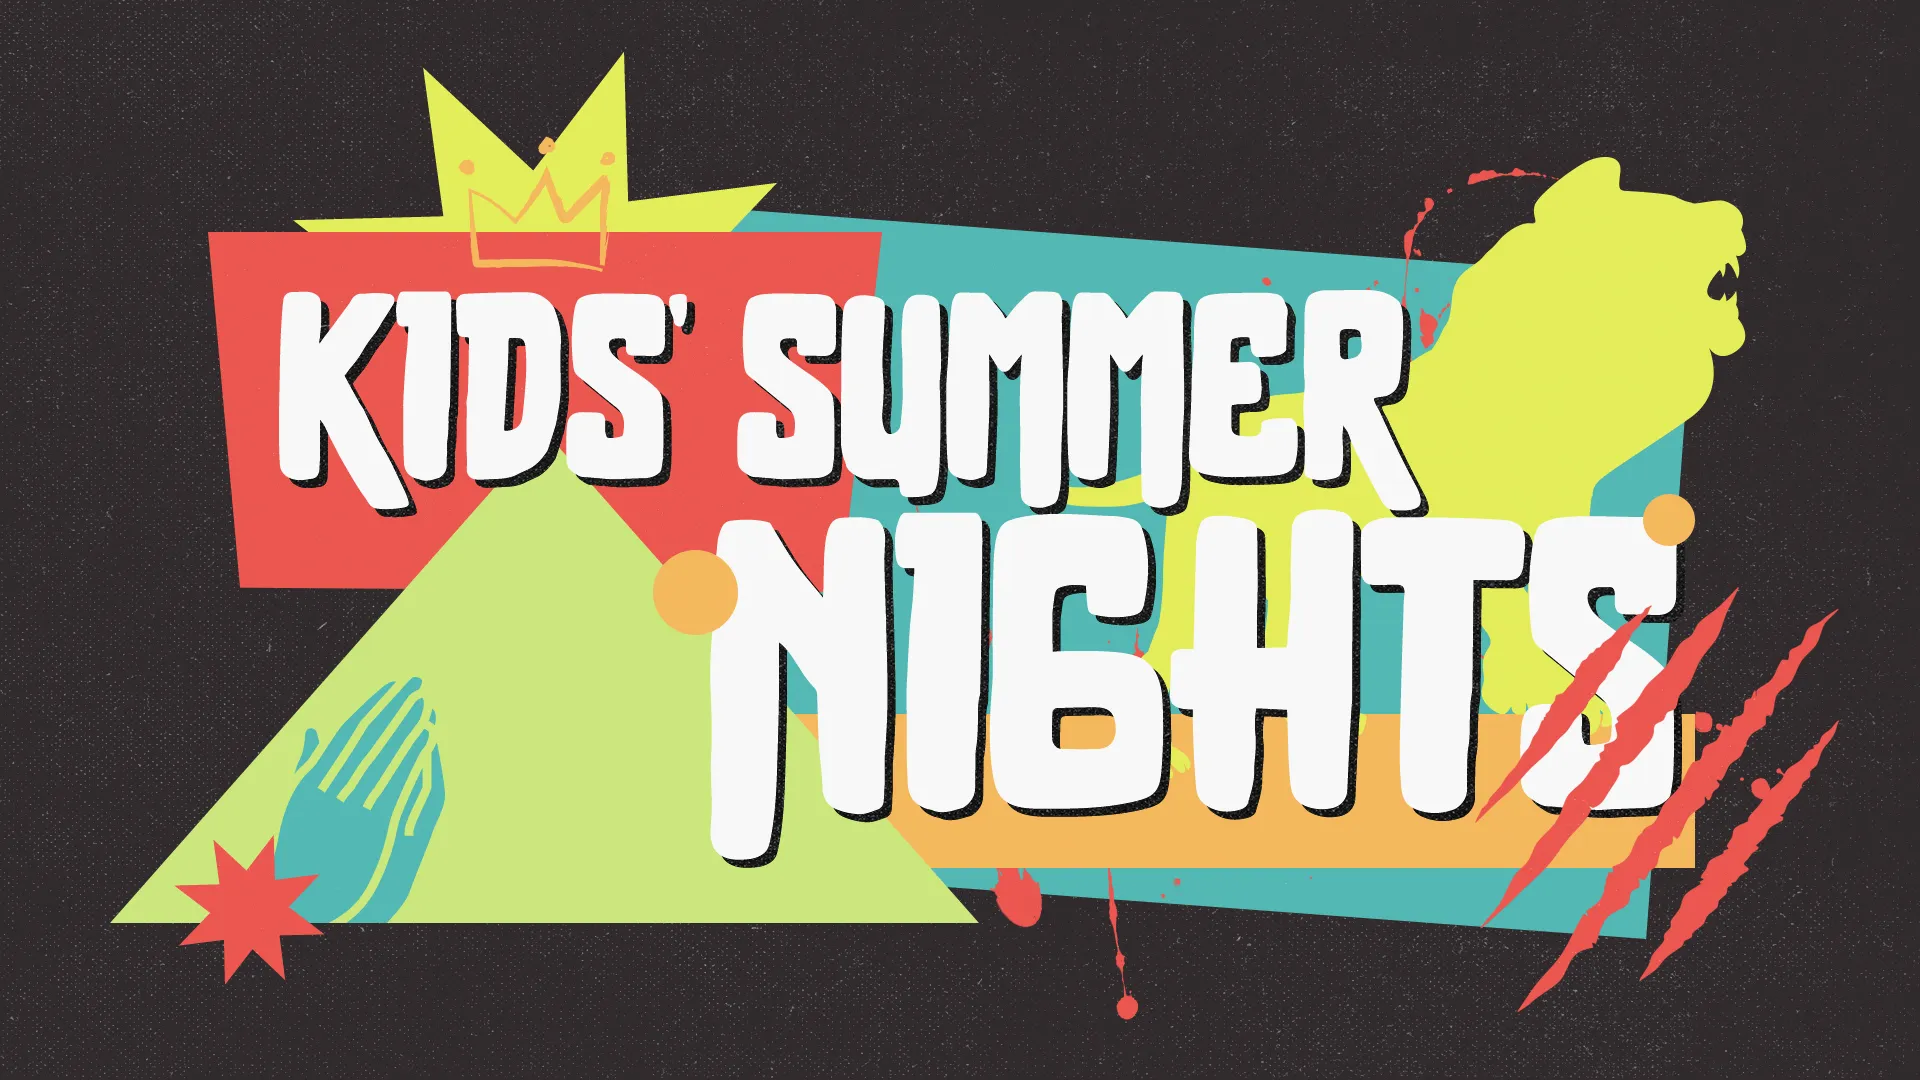 Dive into the fun of summer with this playful and creative graphic for Kids' Summer Nights. Designed to captivate and engage, it’s perfect for any church event aimed at bringing joy to children during the summer season.